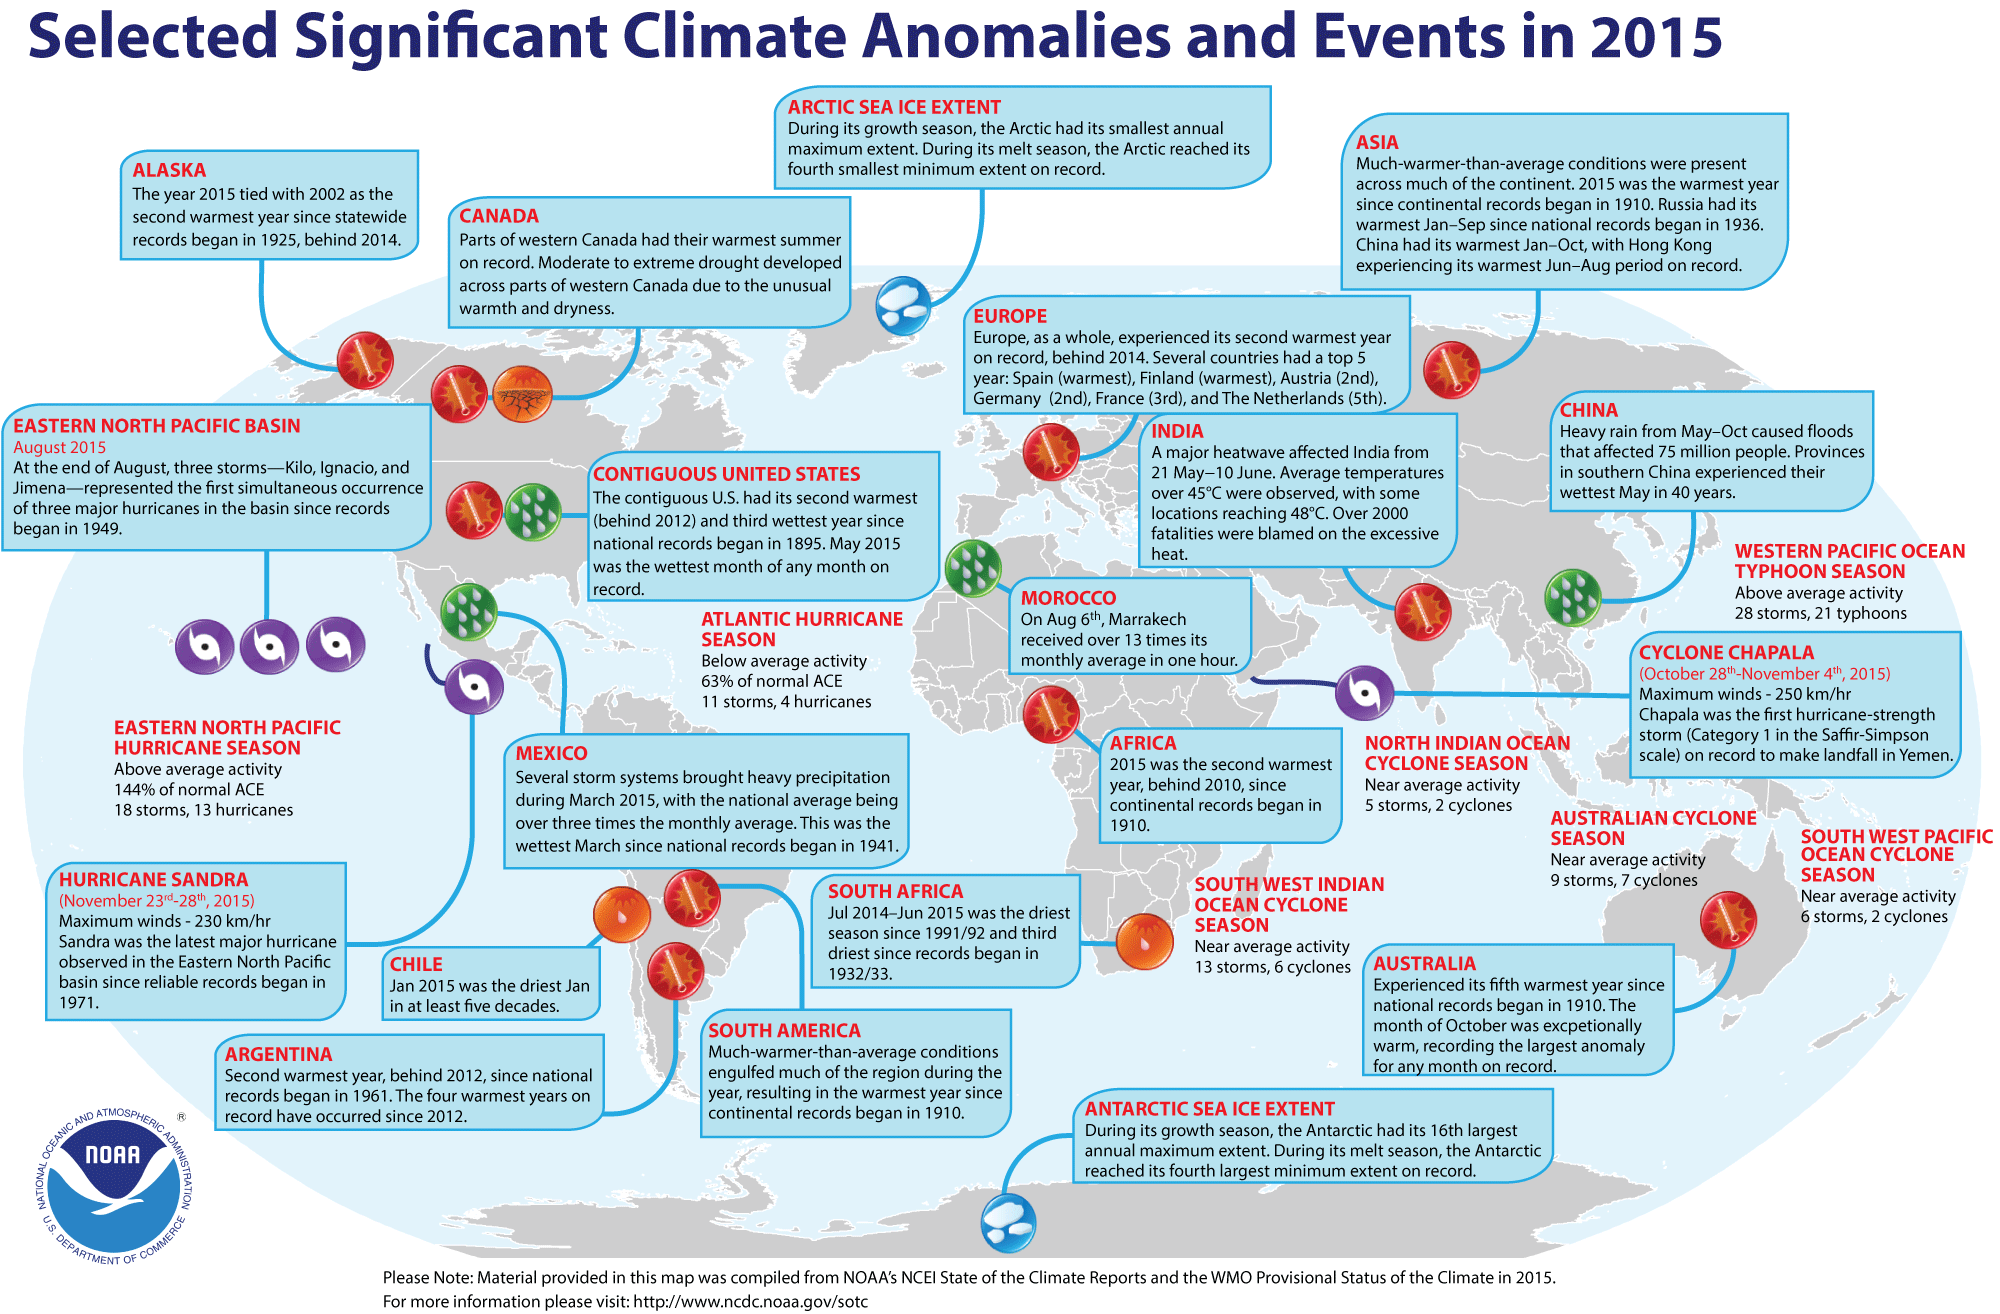 Significant Climate Anomalies and Events in 2015